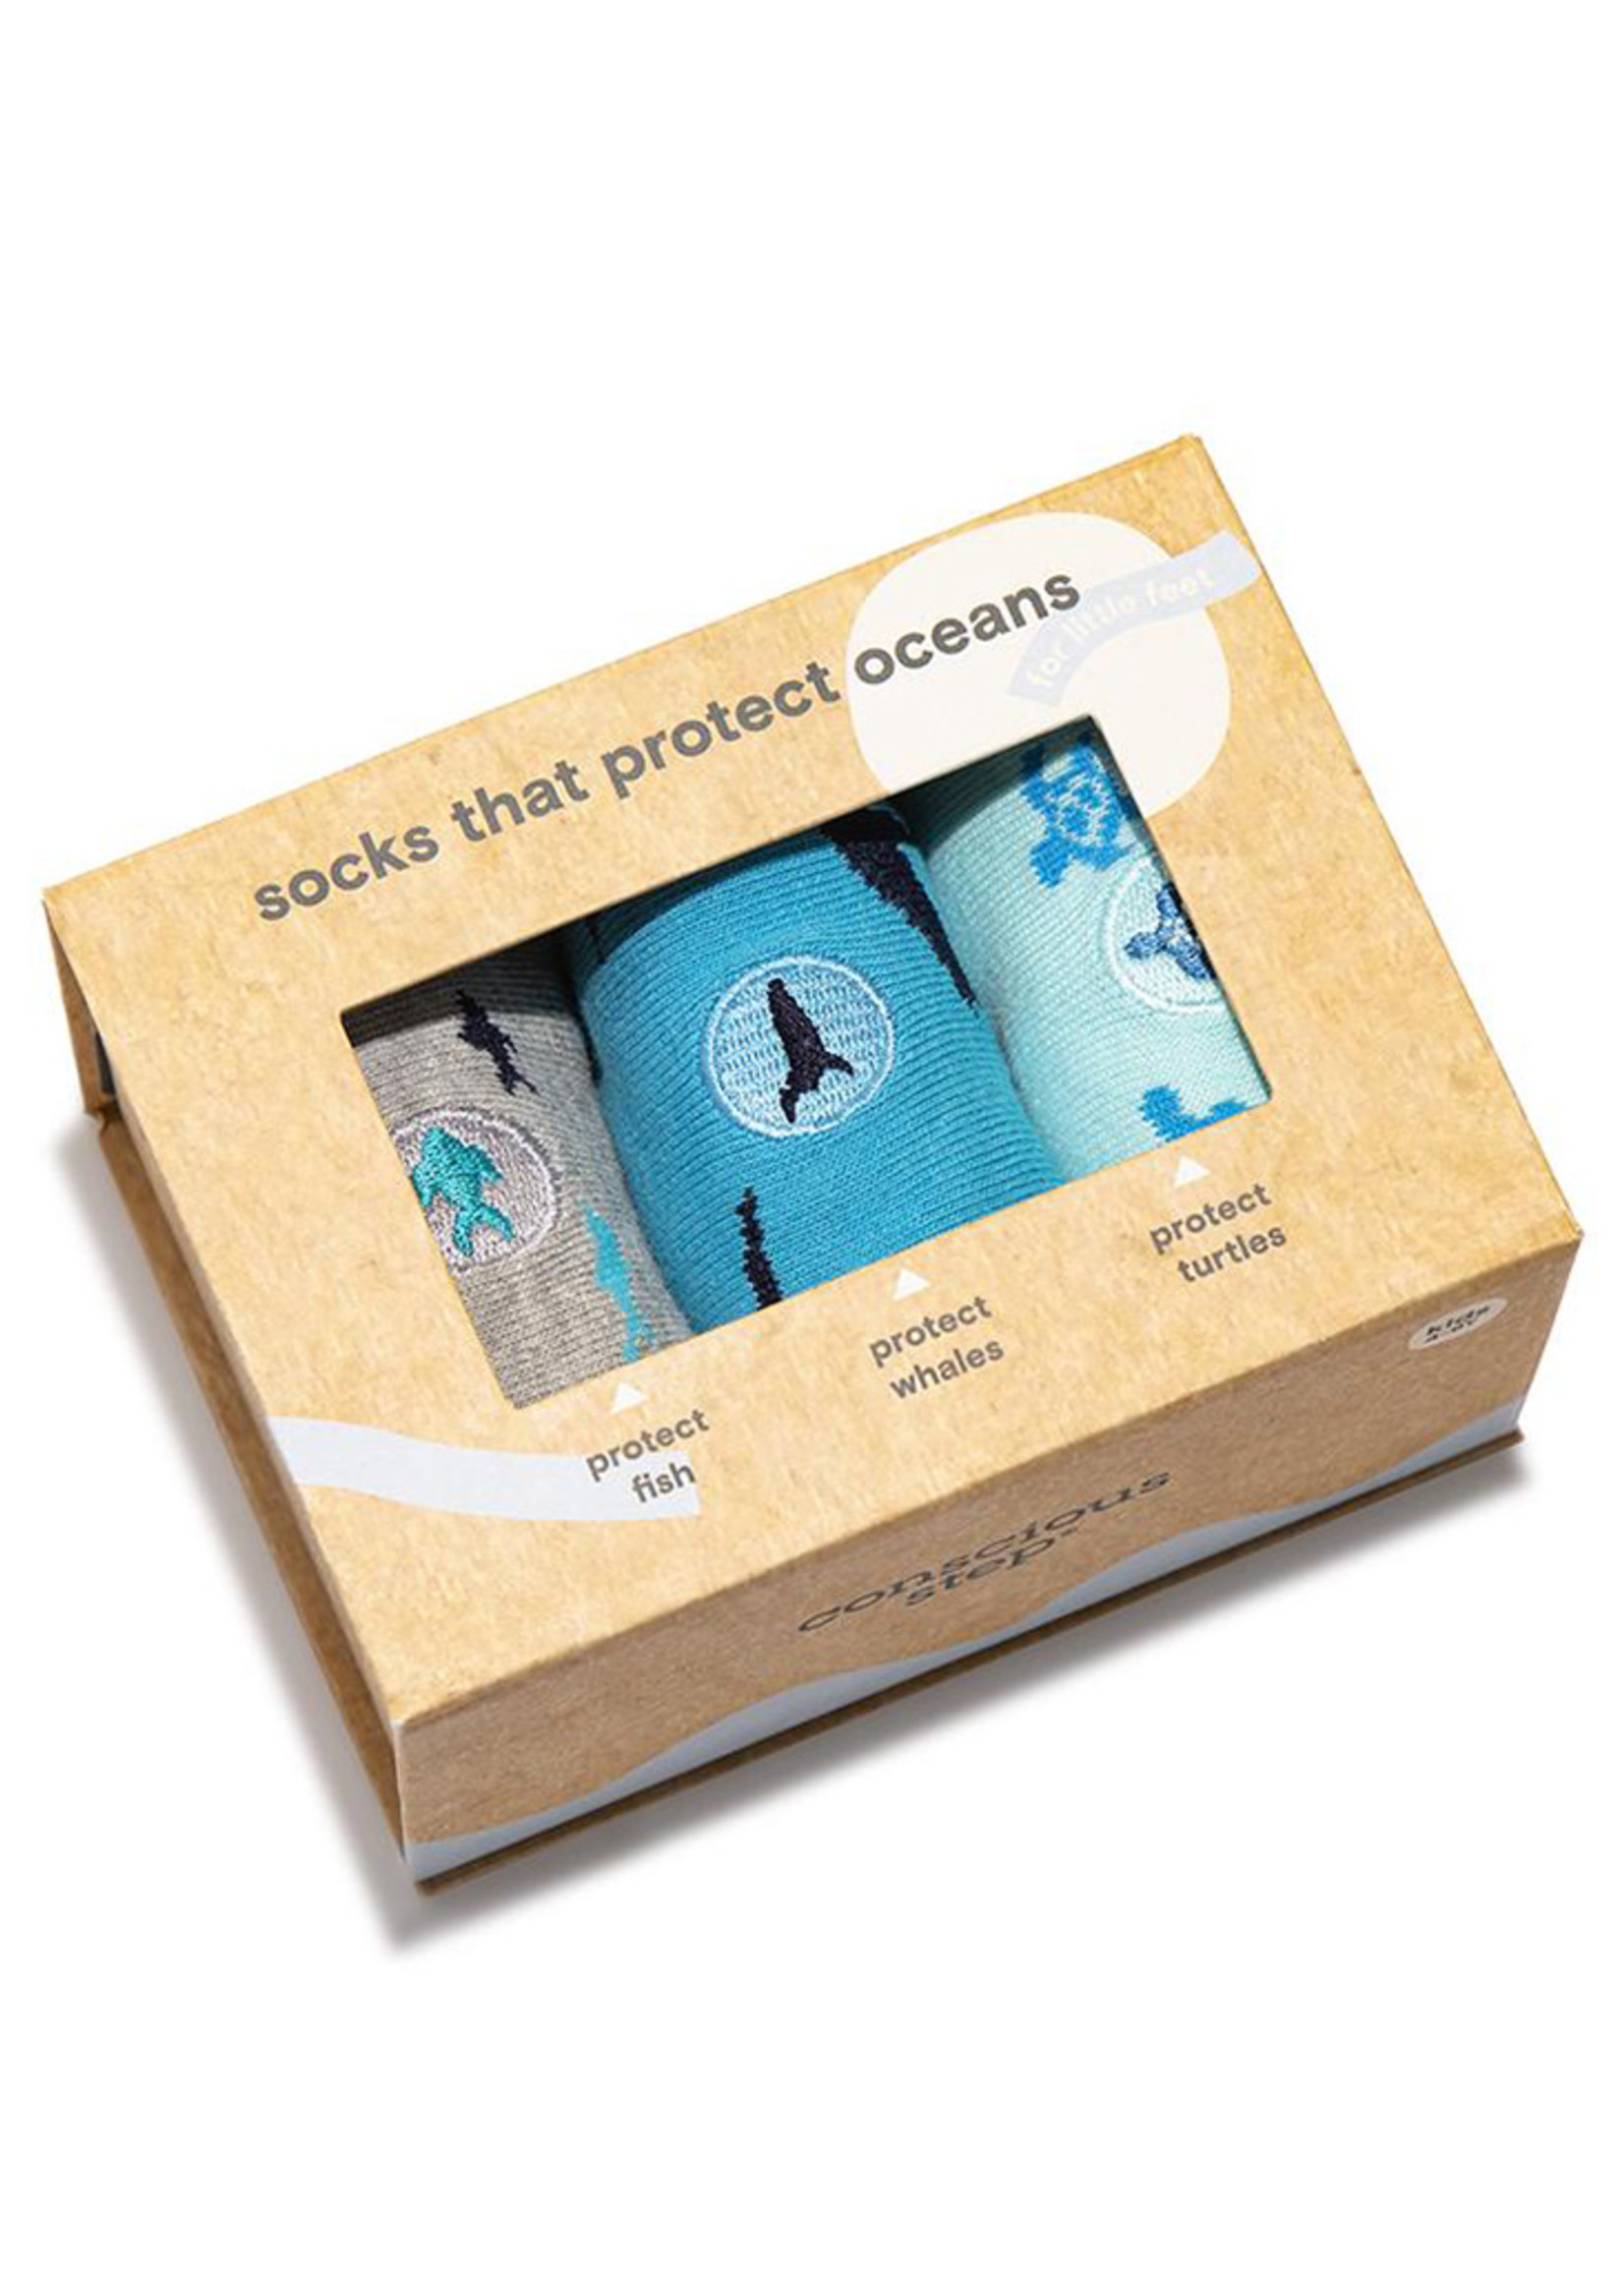 Conscious Step Kid's Sock Box Protects Oceans 7-10Y